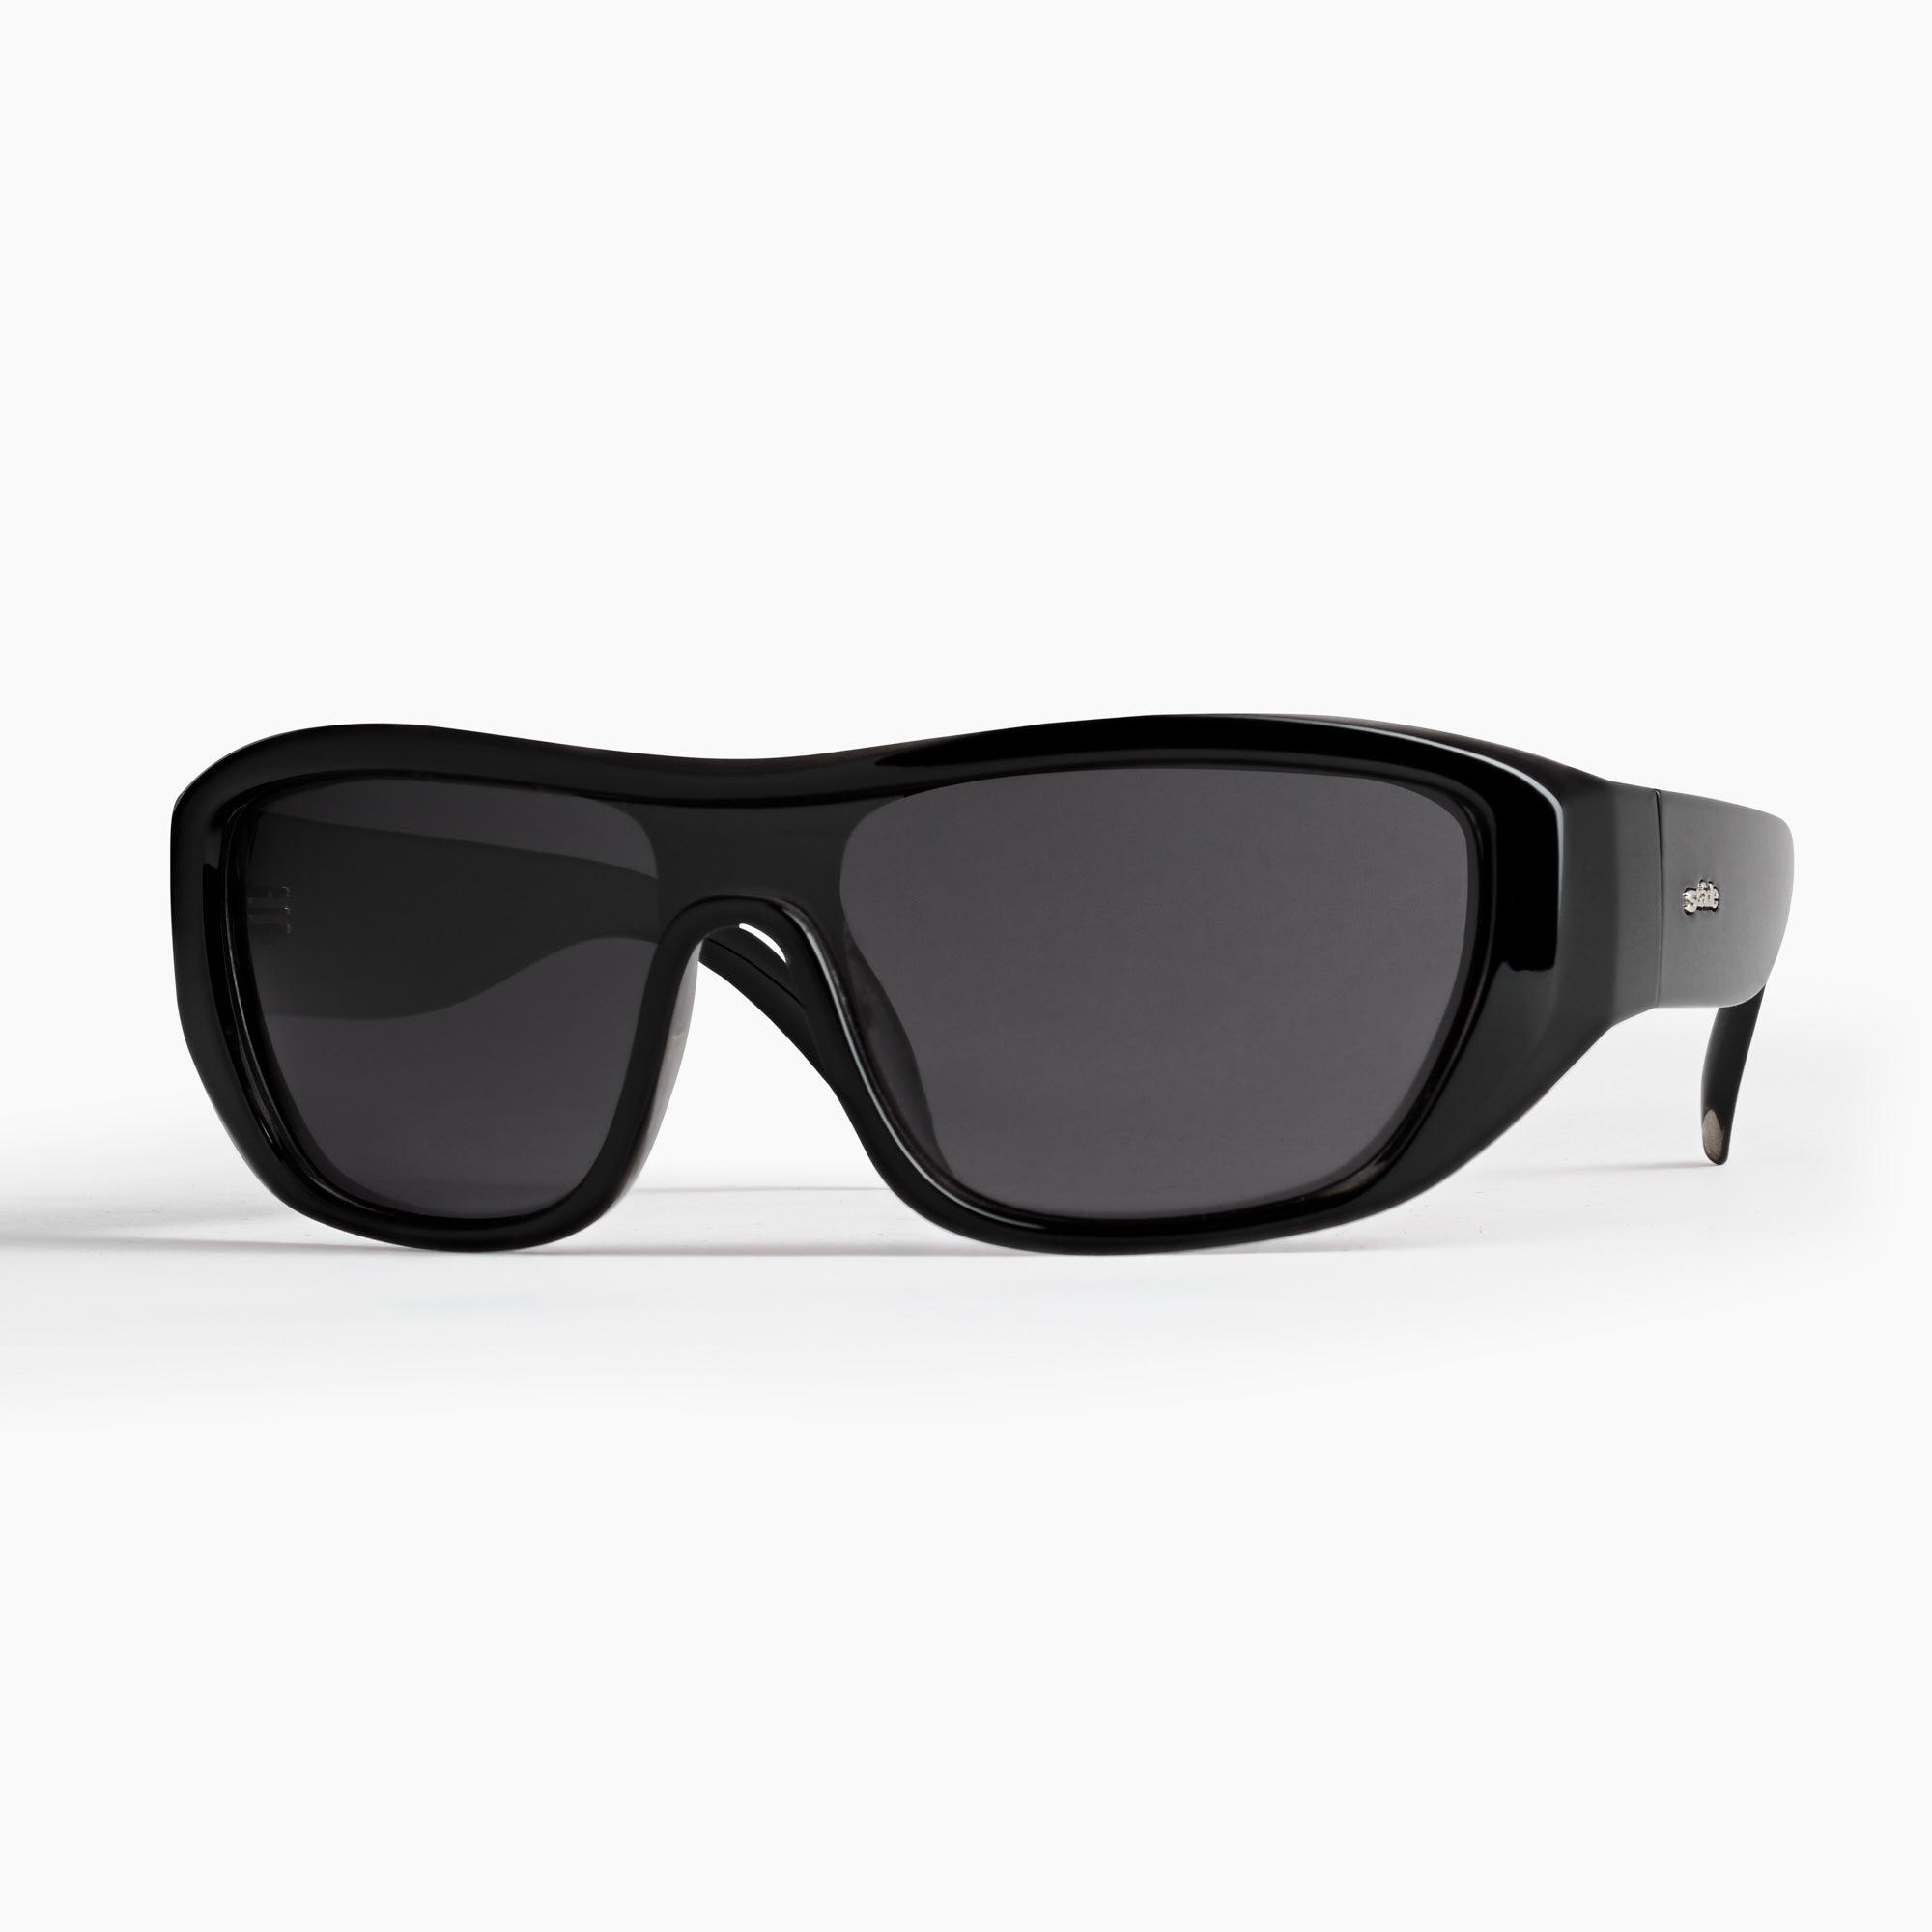 Lexen Sunglasses in elysium double black and ink polarized